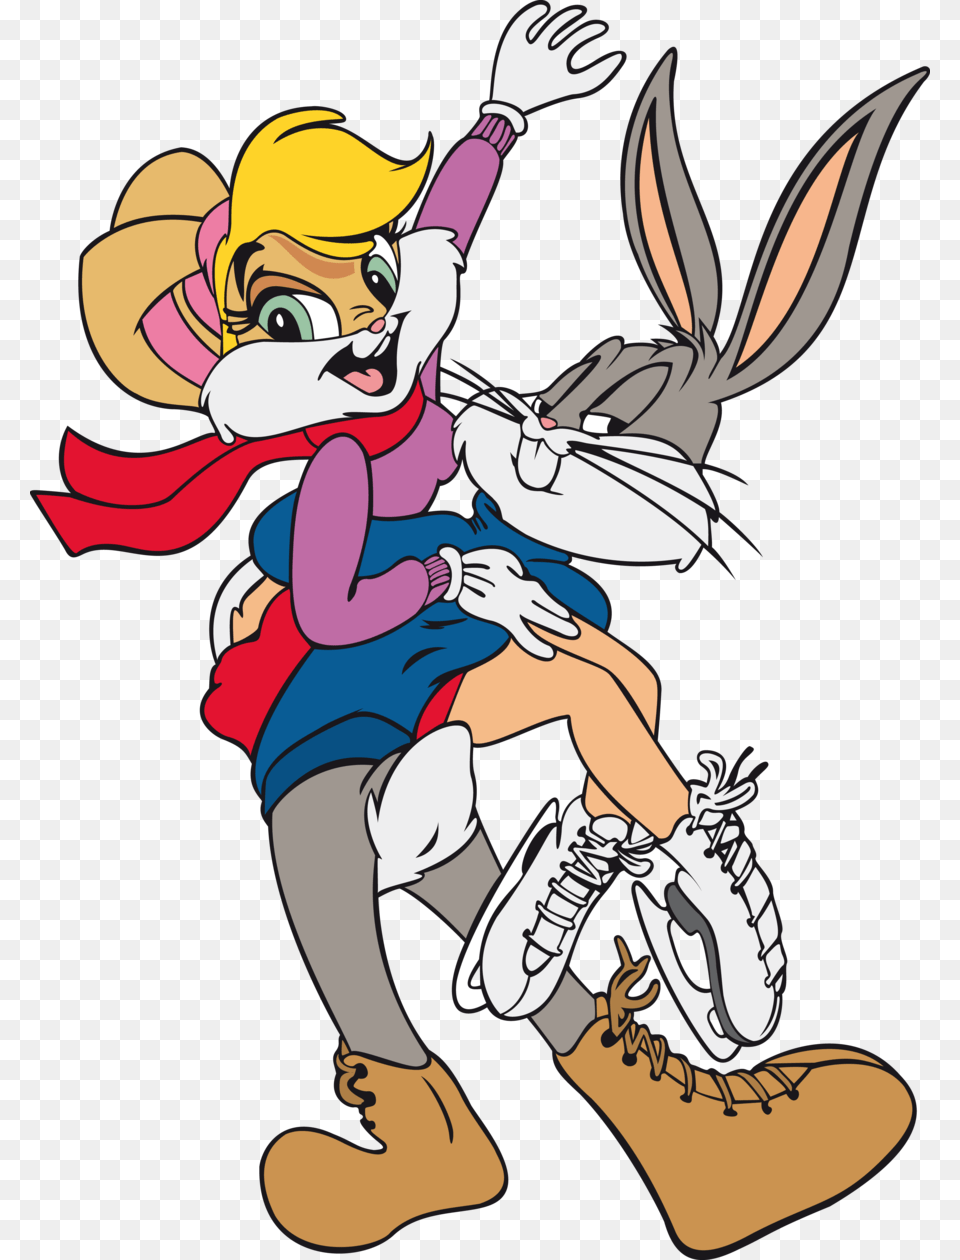 Bugs Bunny And Lola Bunny Pictures Bugs Bunny And Lola Bunny, Book, Comics, Publication, Cartoon Free Png